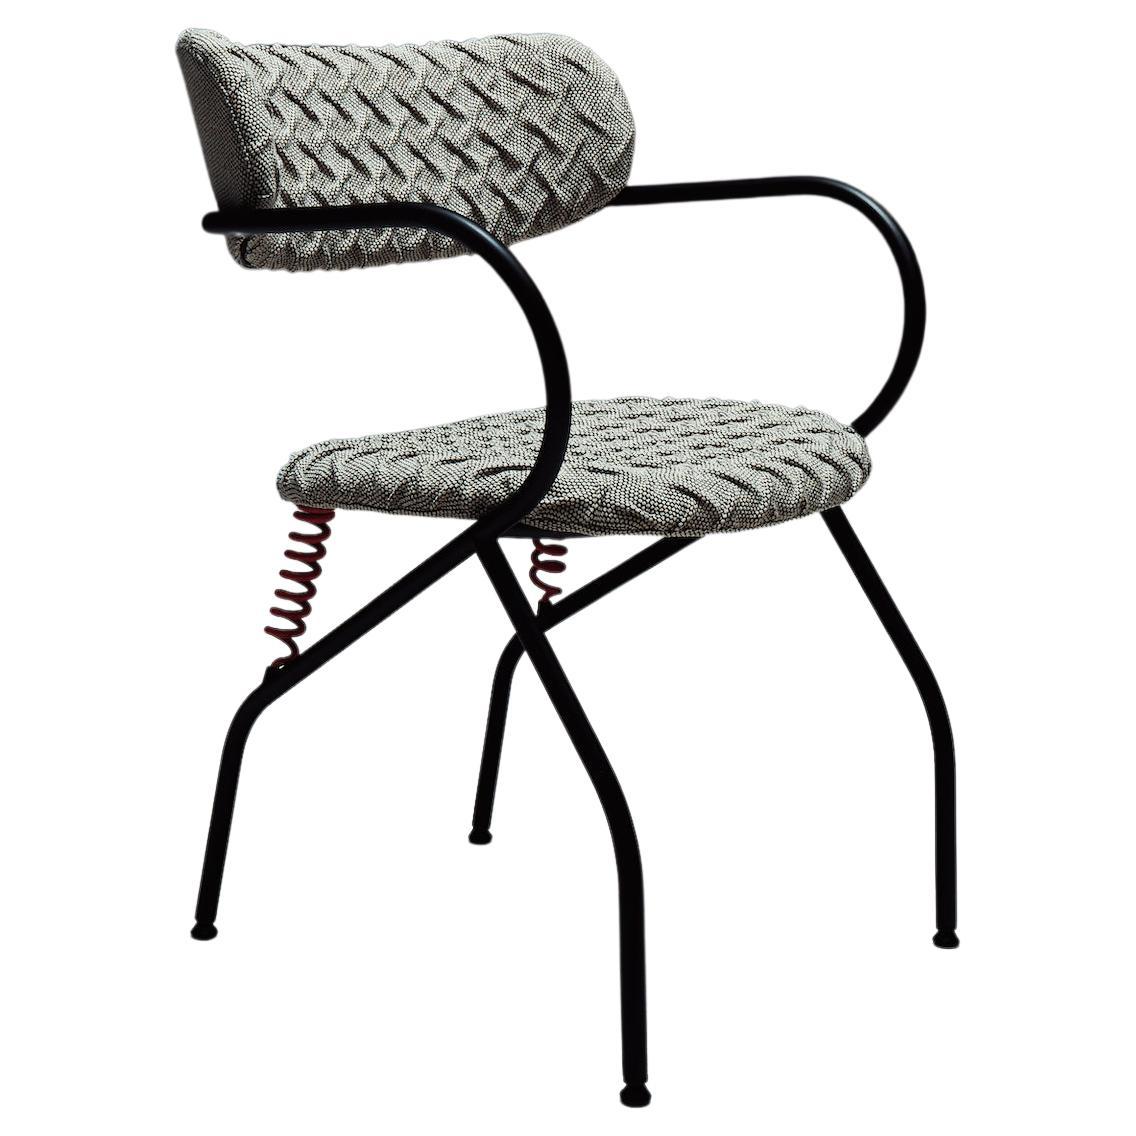 Customizable La Manufacture-Paris Spring Chair Designed by Front For Sale